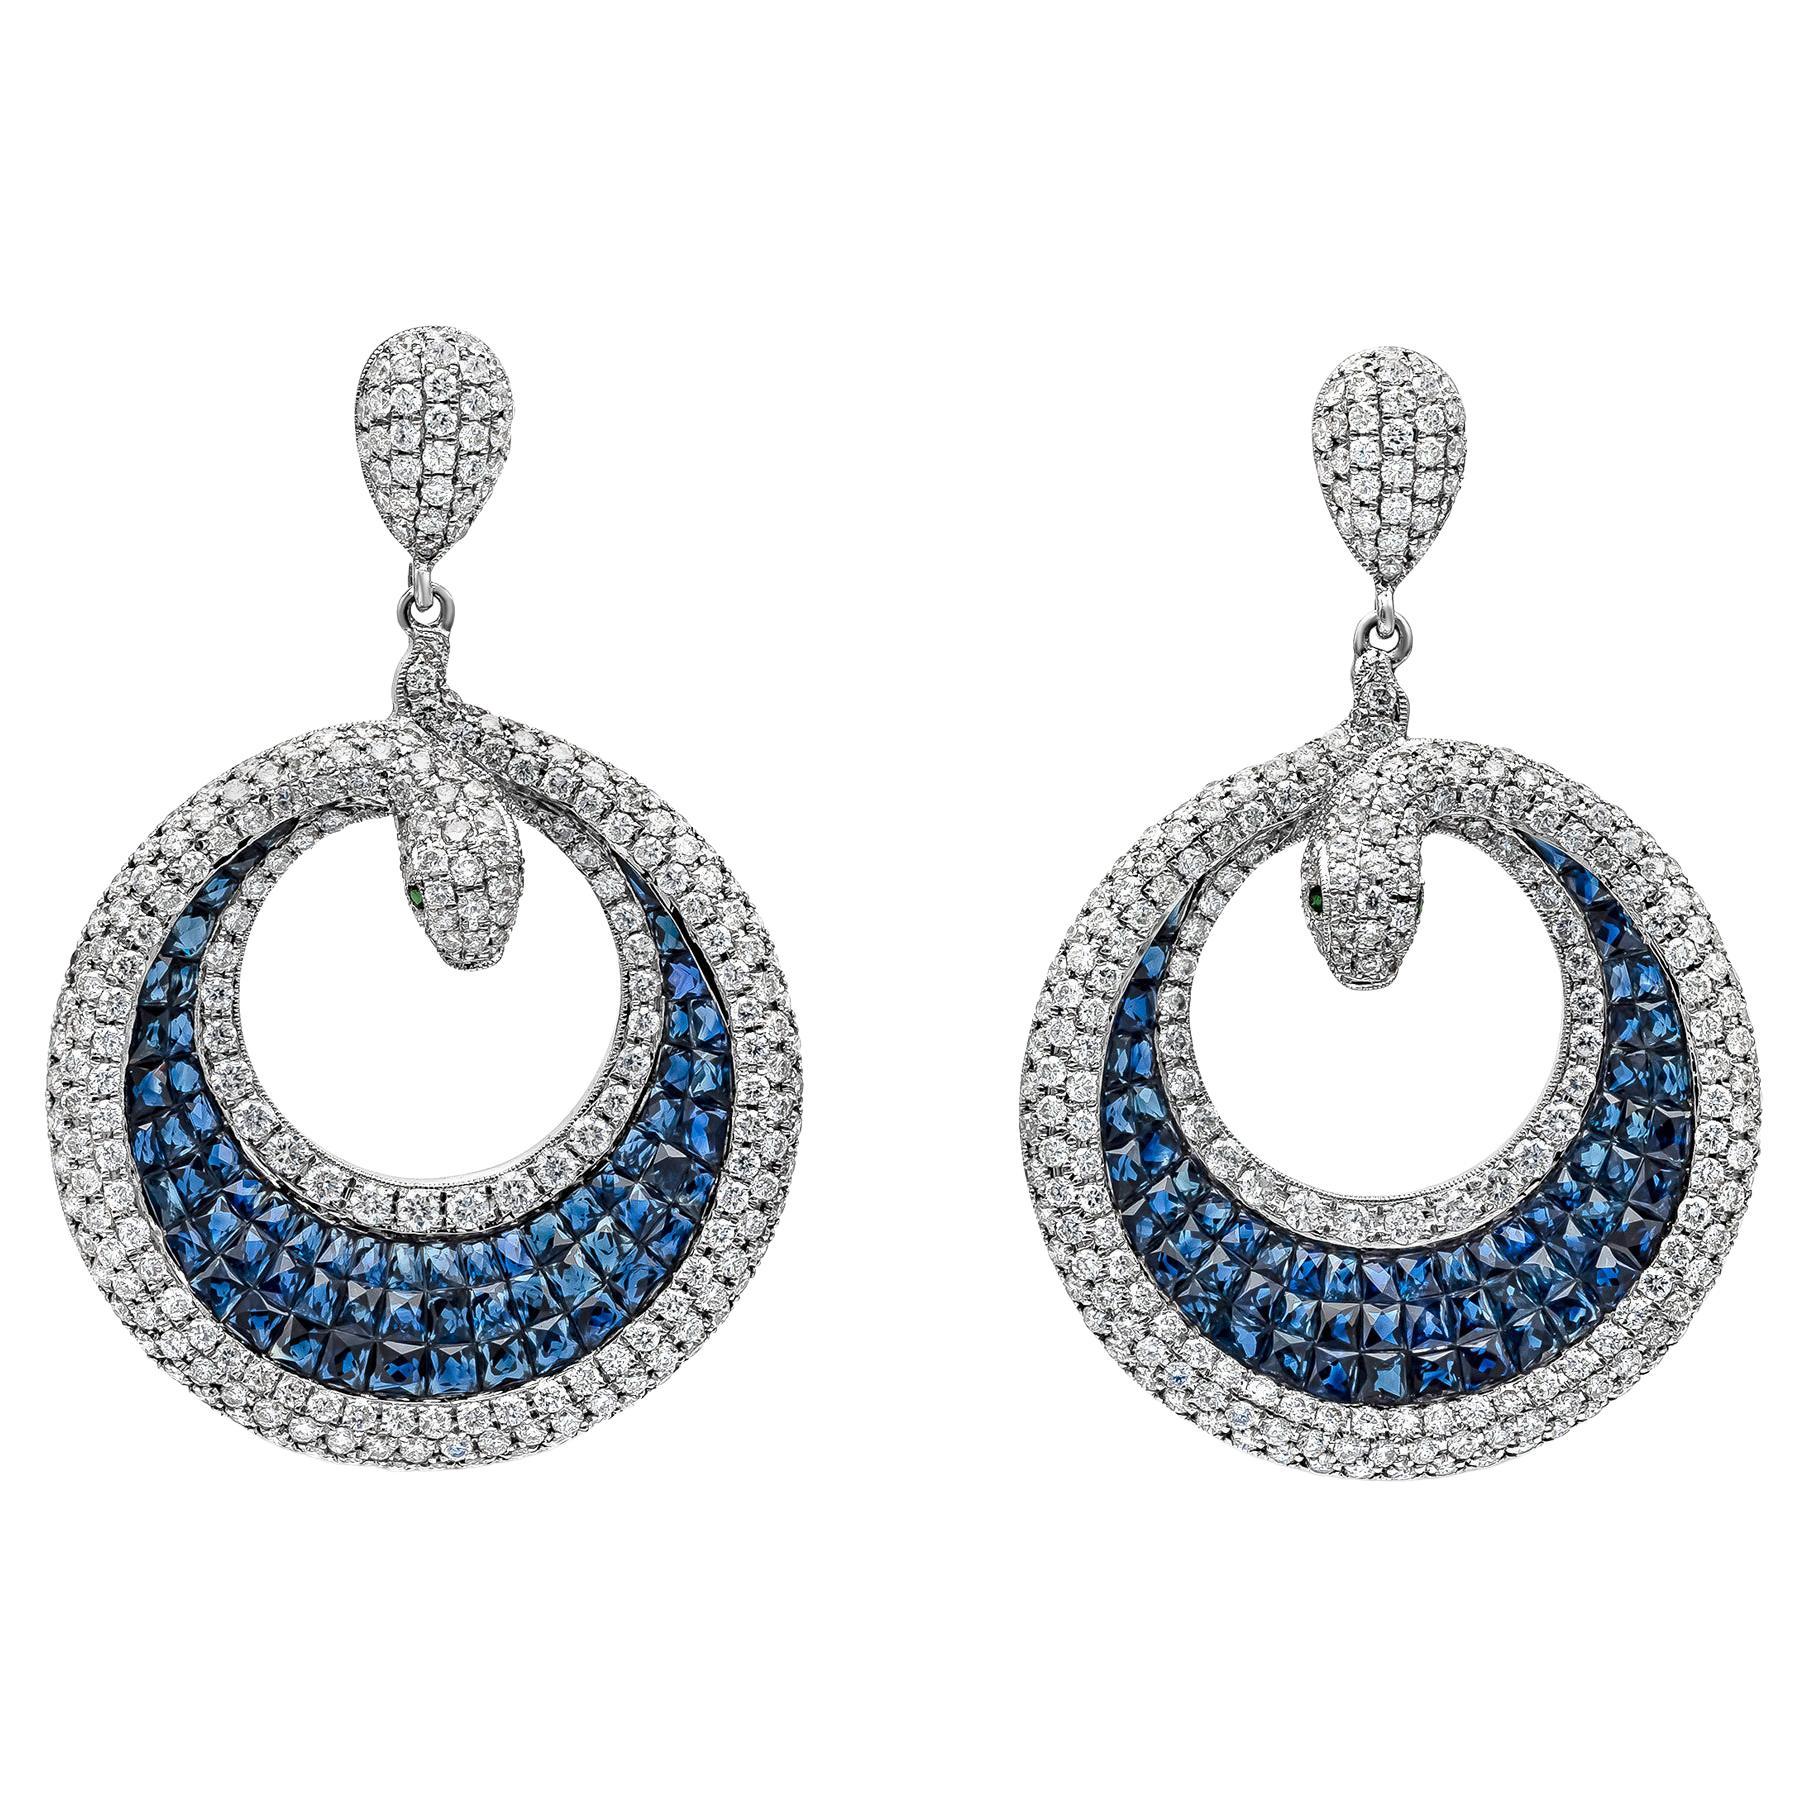 10.73 Carats Total Blue Sapphire and Diamond Serpent Dangle Earrings